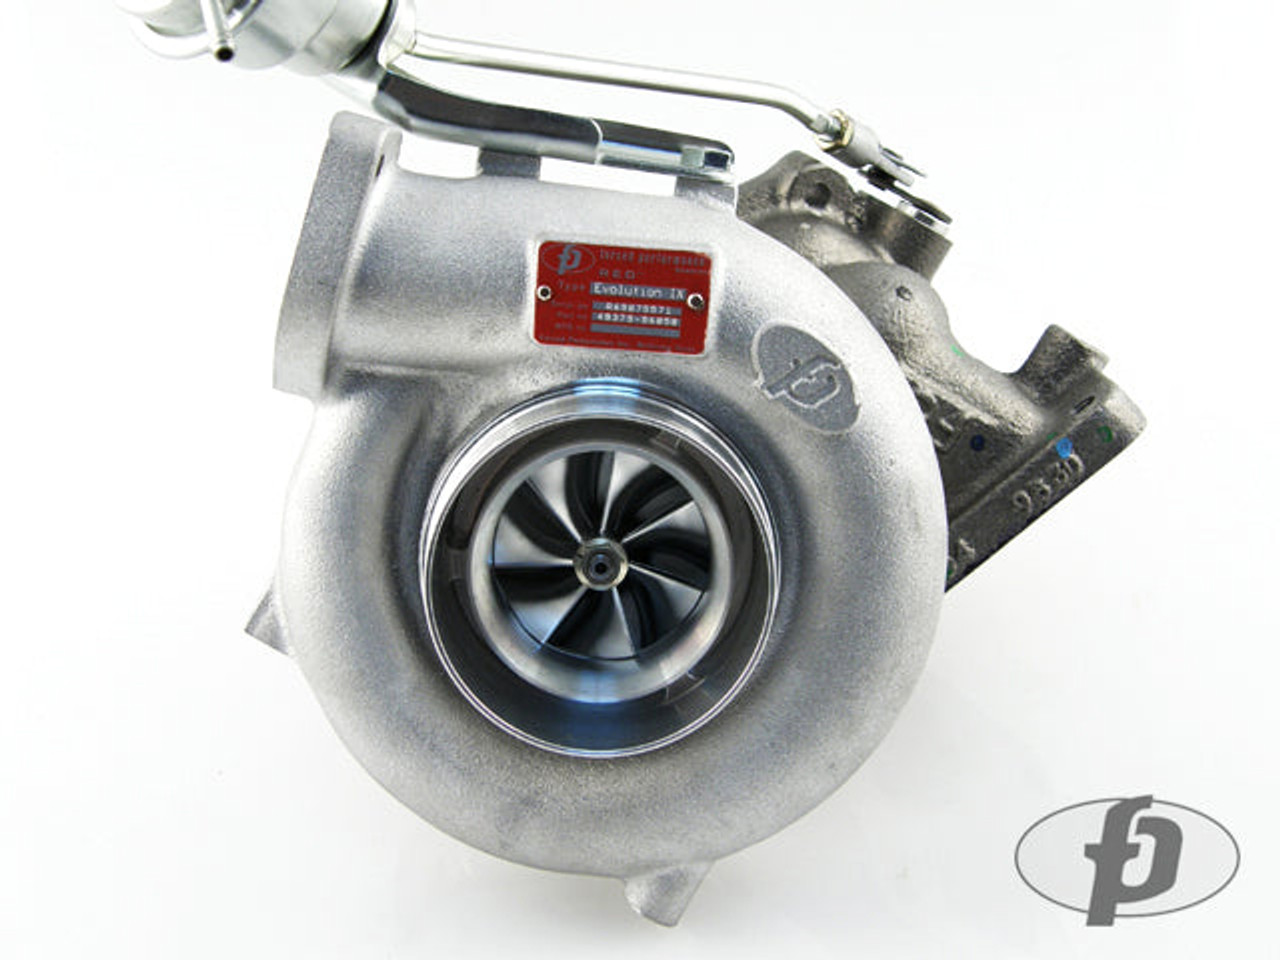 Forced Performance RED Turbocharger for Evolution IX